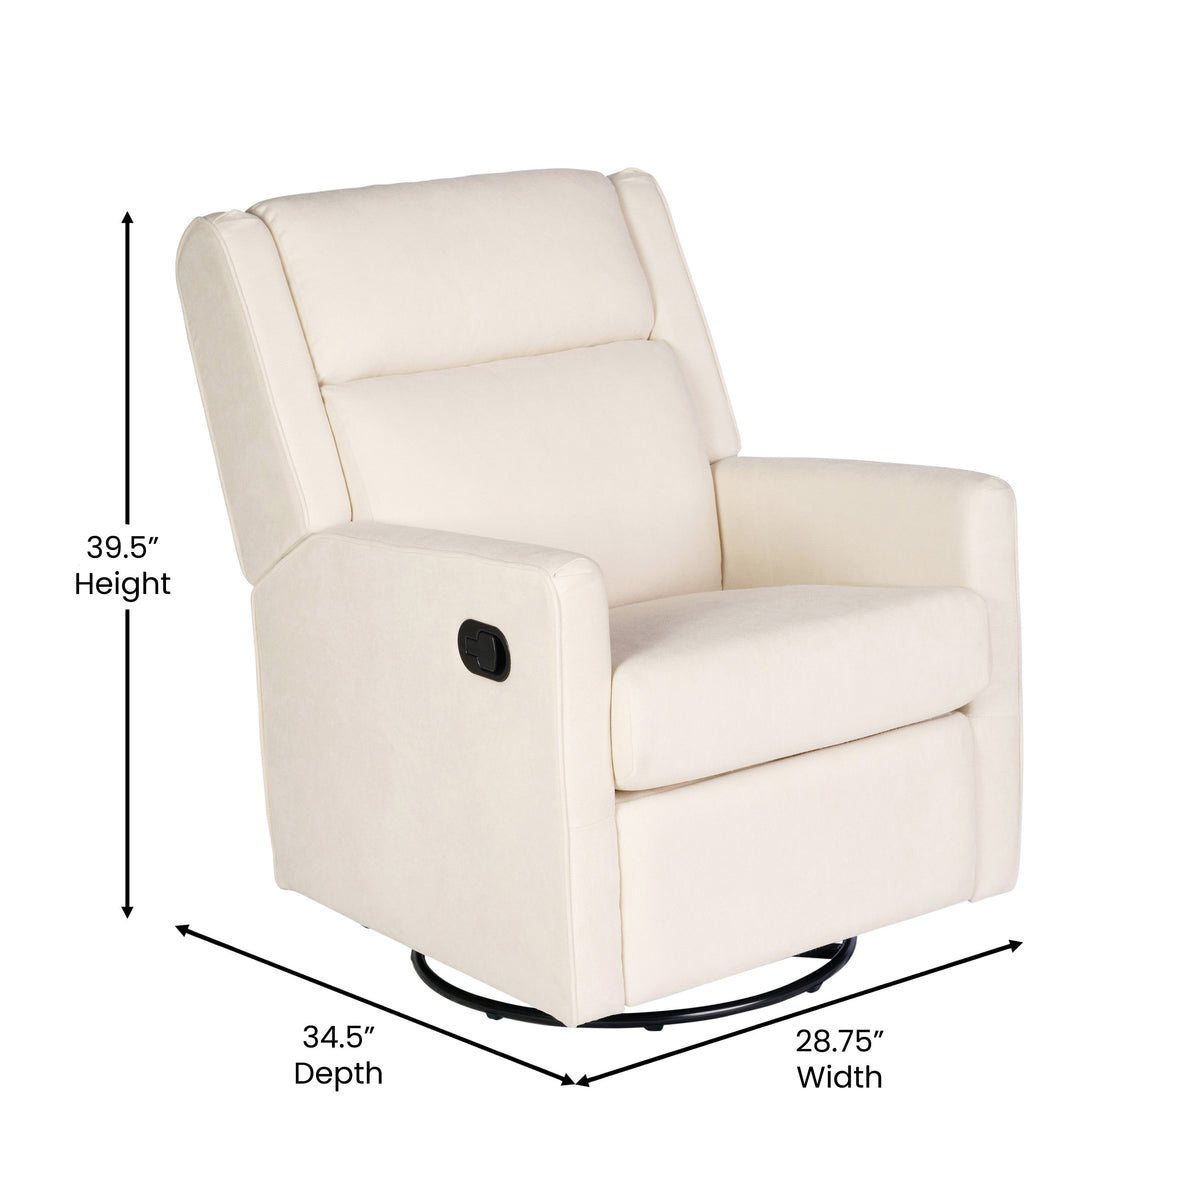 Cream |#| Manual Rocking Recliner Chair with 360° Swivel and Gliding Motion in Cream